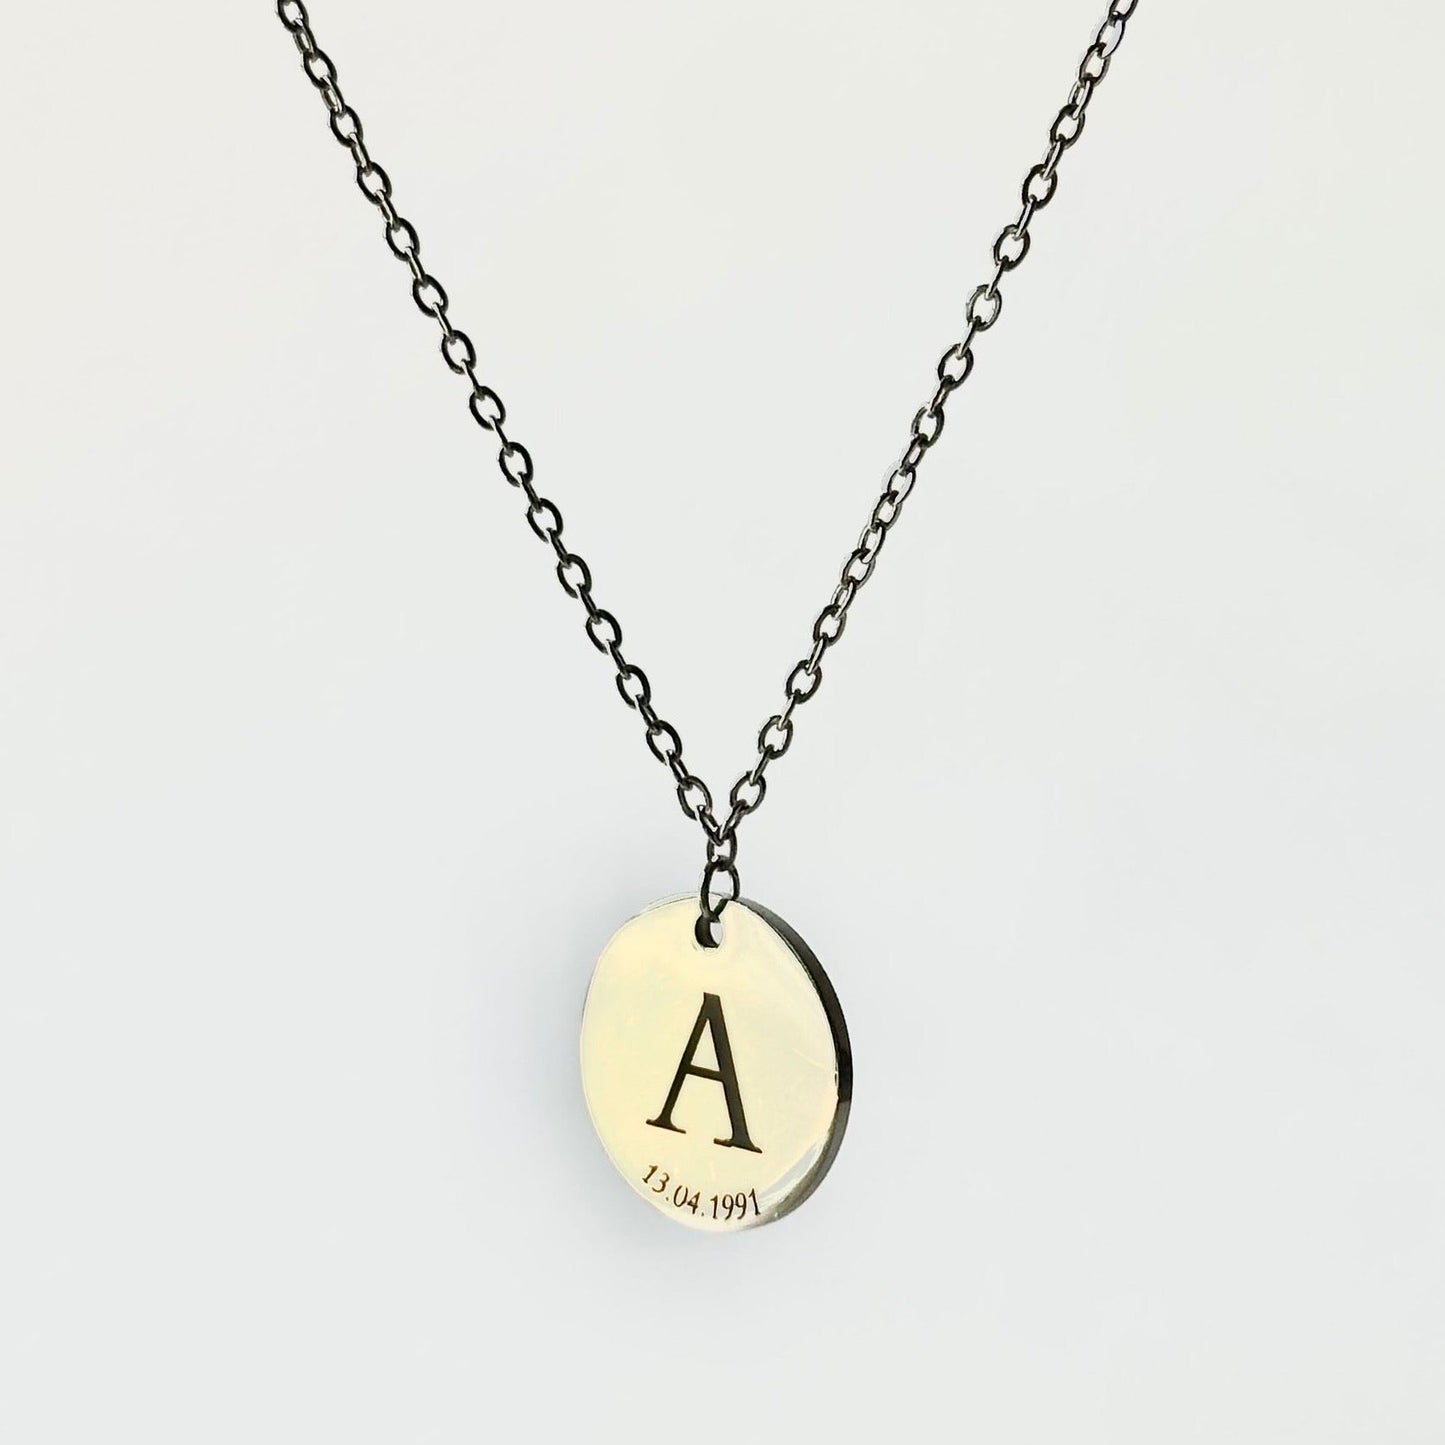 Get trendy with Galway Necklace - Engraved disk - Disk Necklace available at Alma Ireland. Grab yours for €24.99 today!